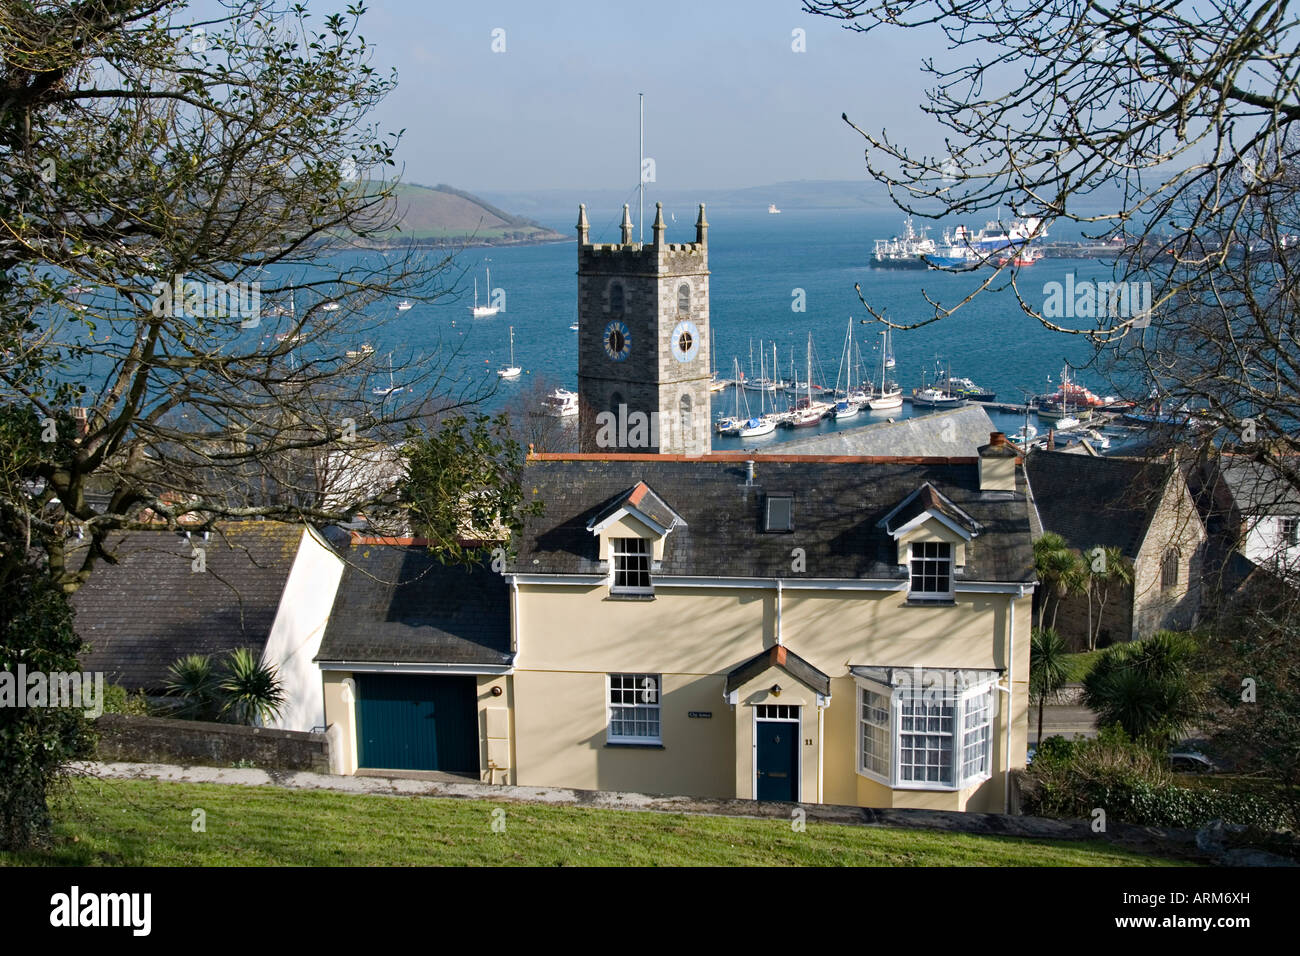 Falmouth Cornwall UK. The Church of King Charles the Martyr, 1665, with Carrick Roads (the River Fal estuary) in the background Stock Photo